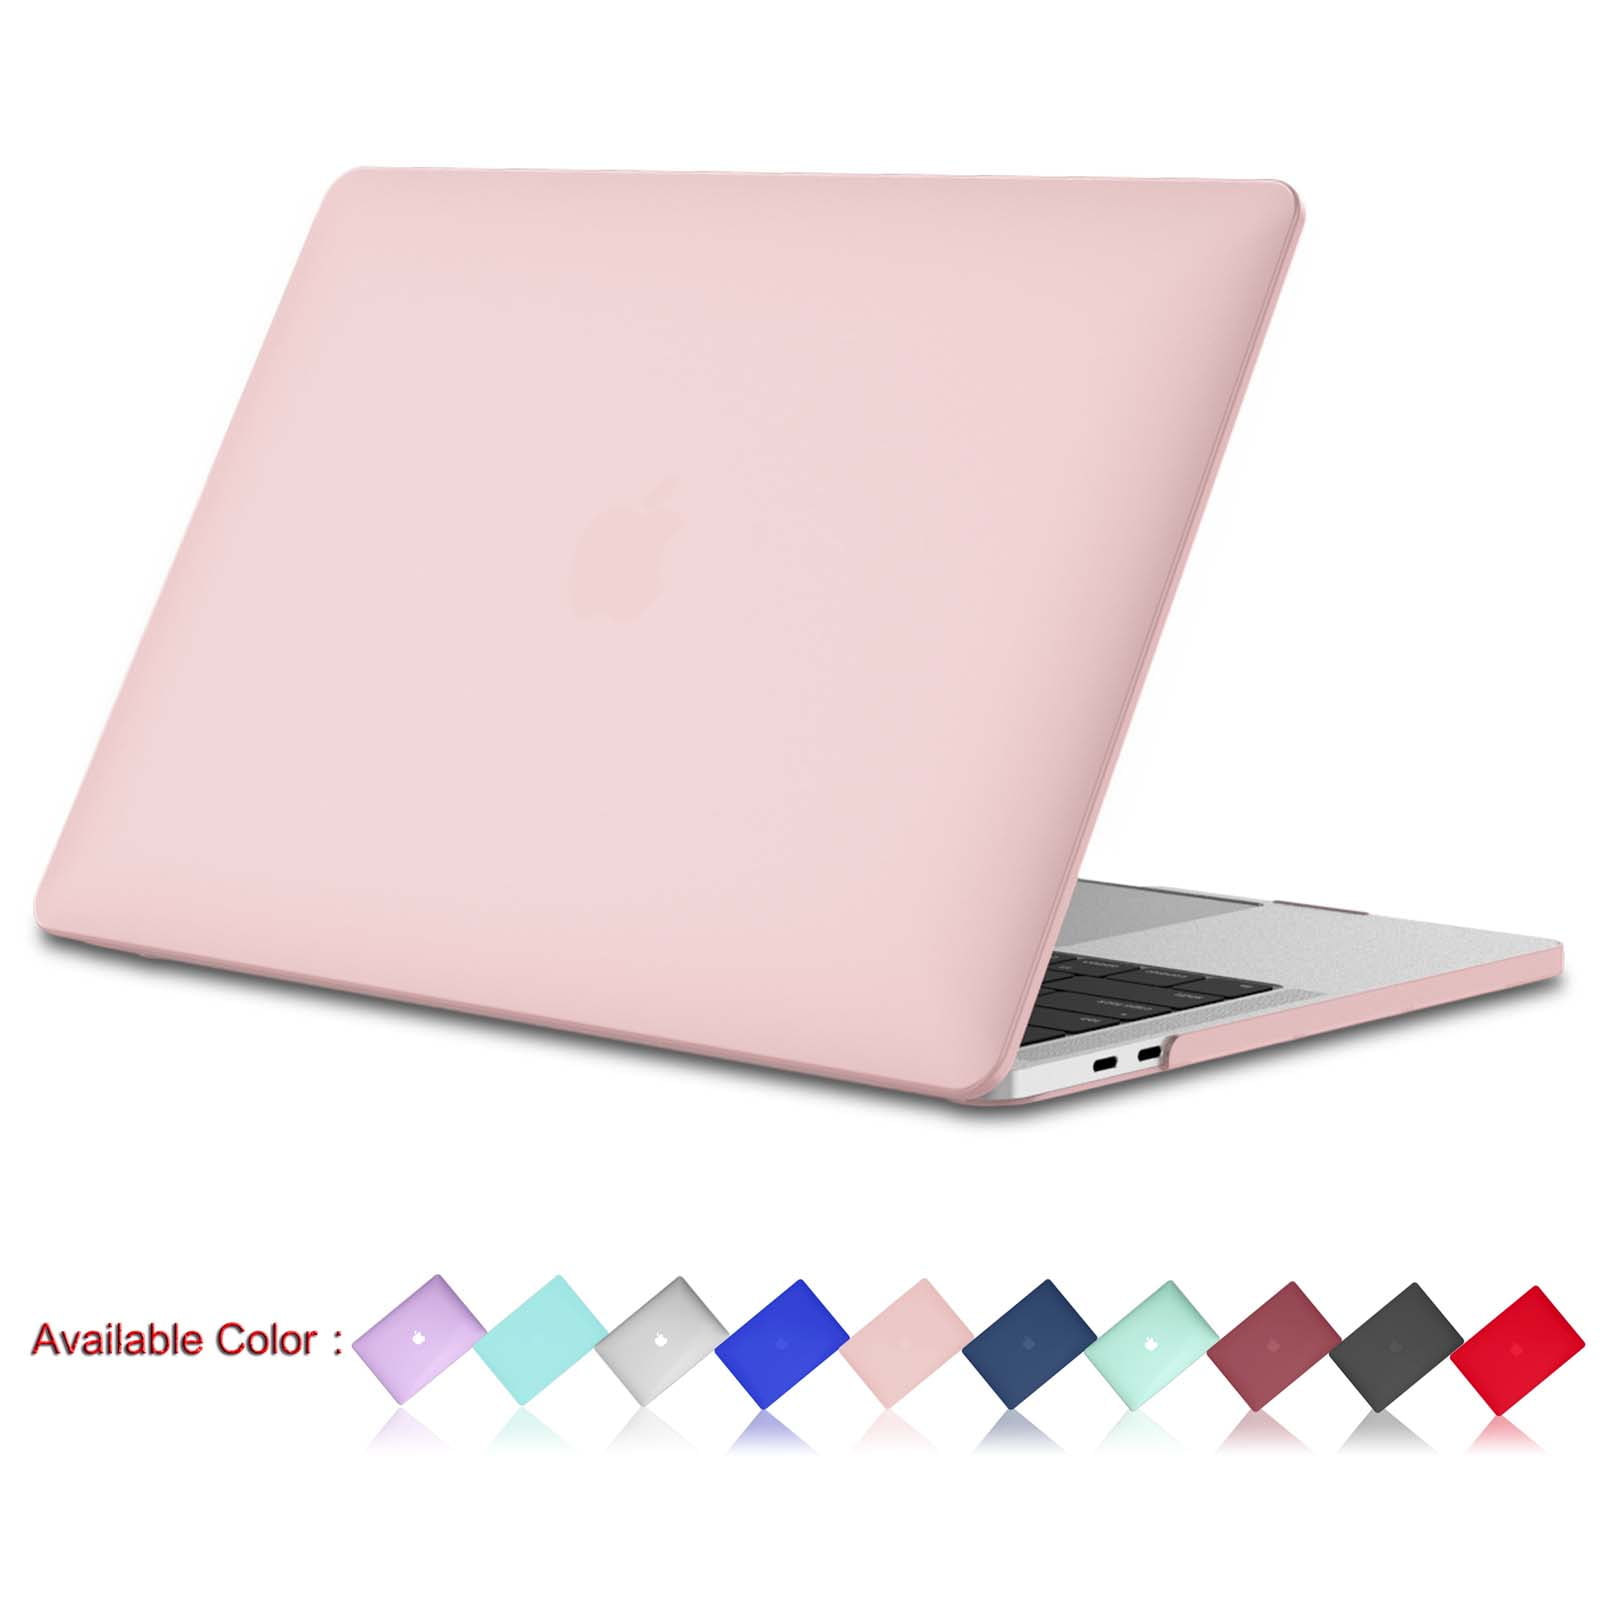 Wood Grain Leather Coated Hard Plastic Case Cover for Macbook 11 12 13 15 Laptop 